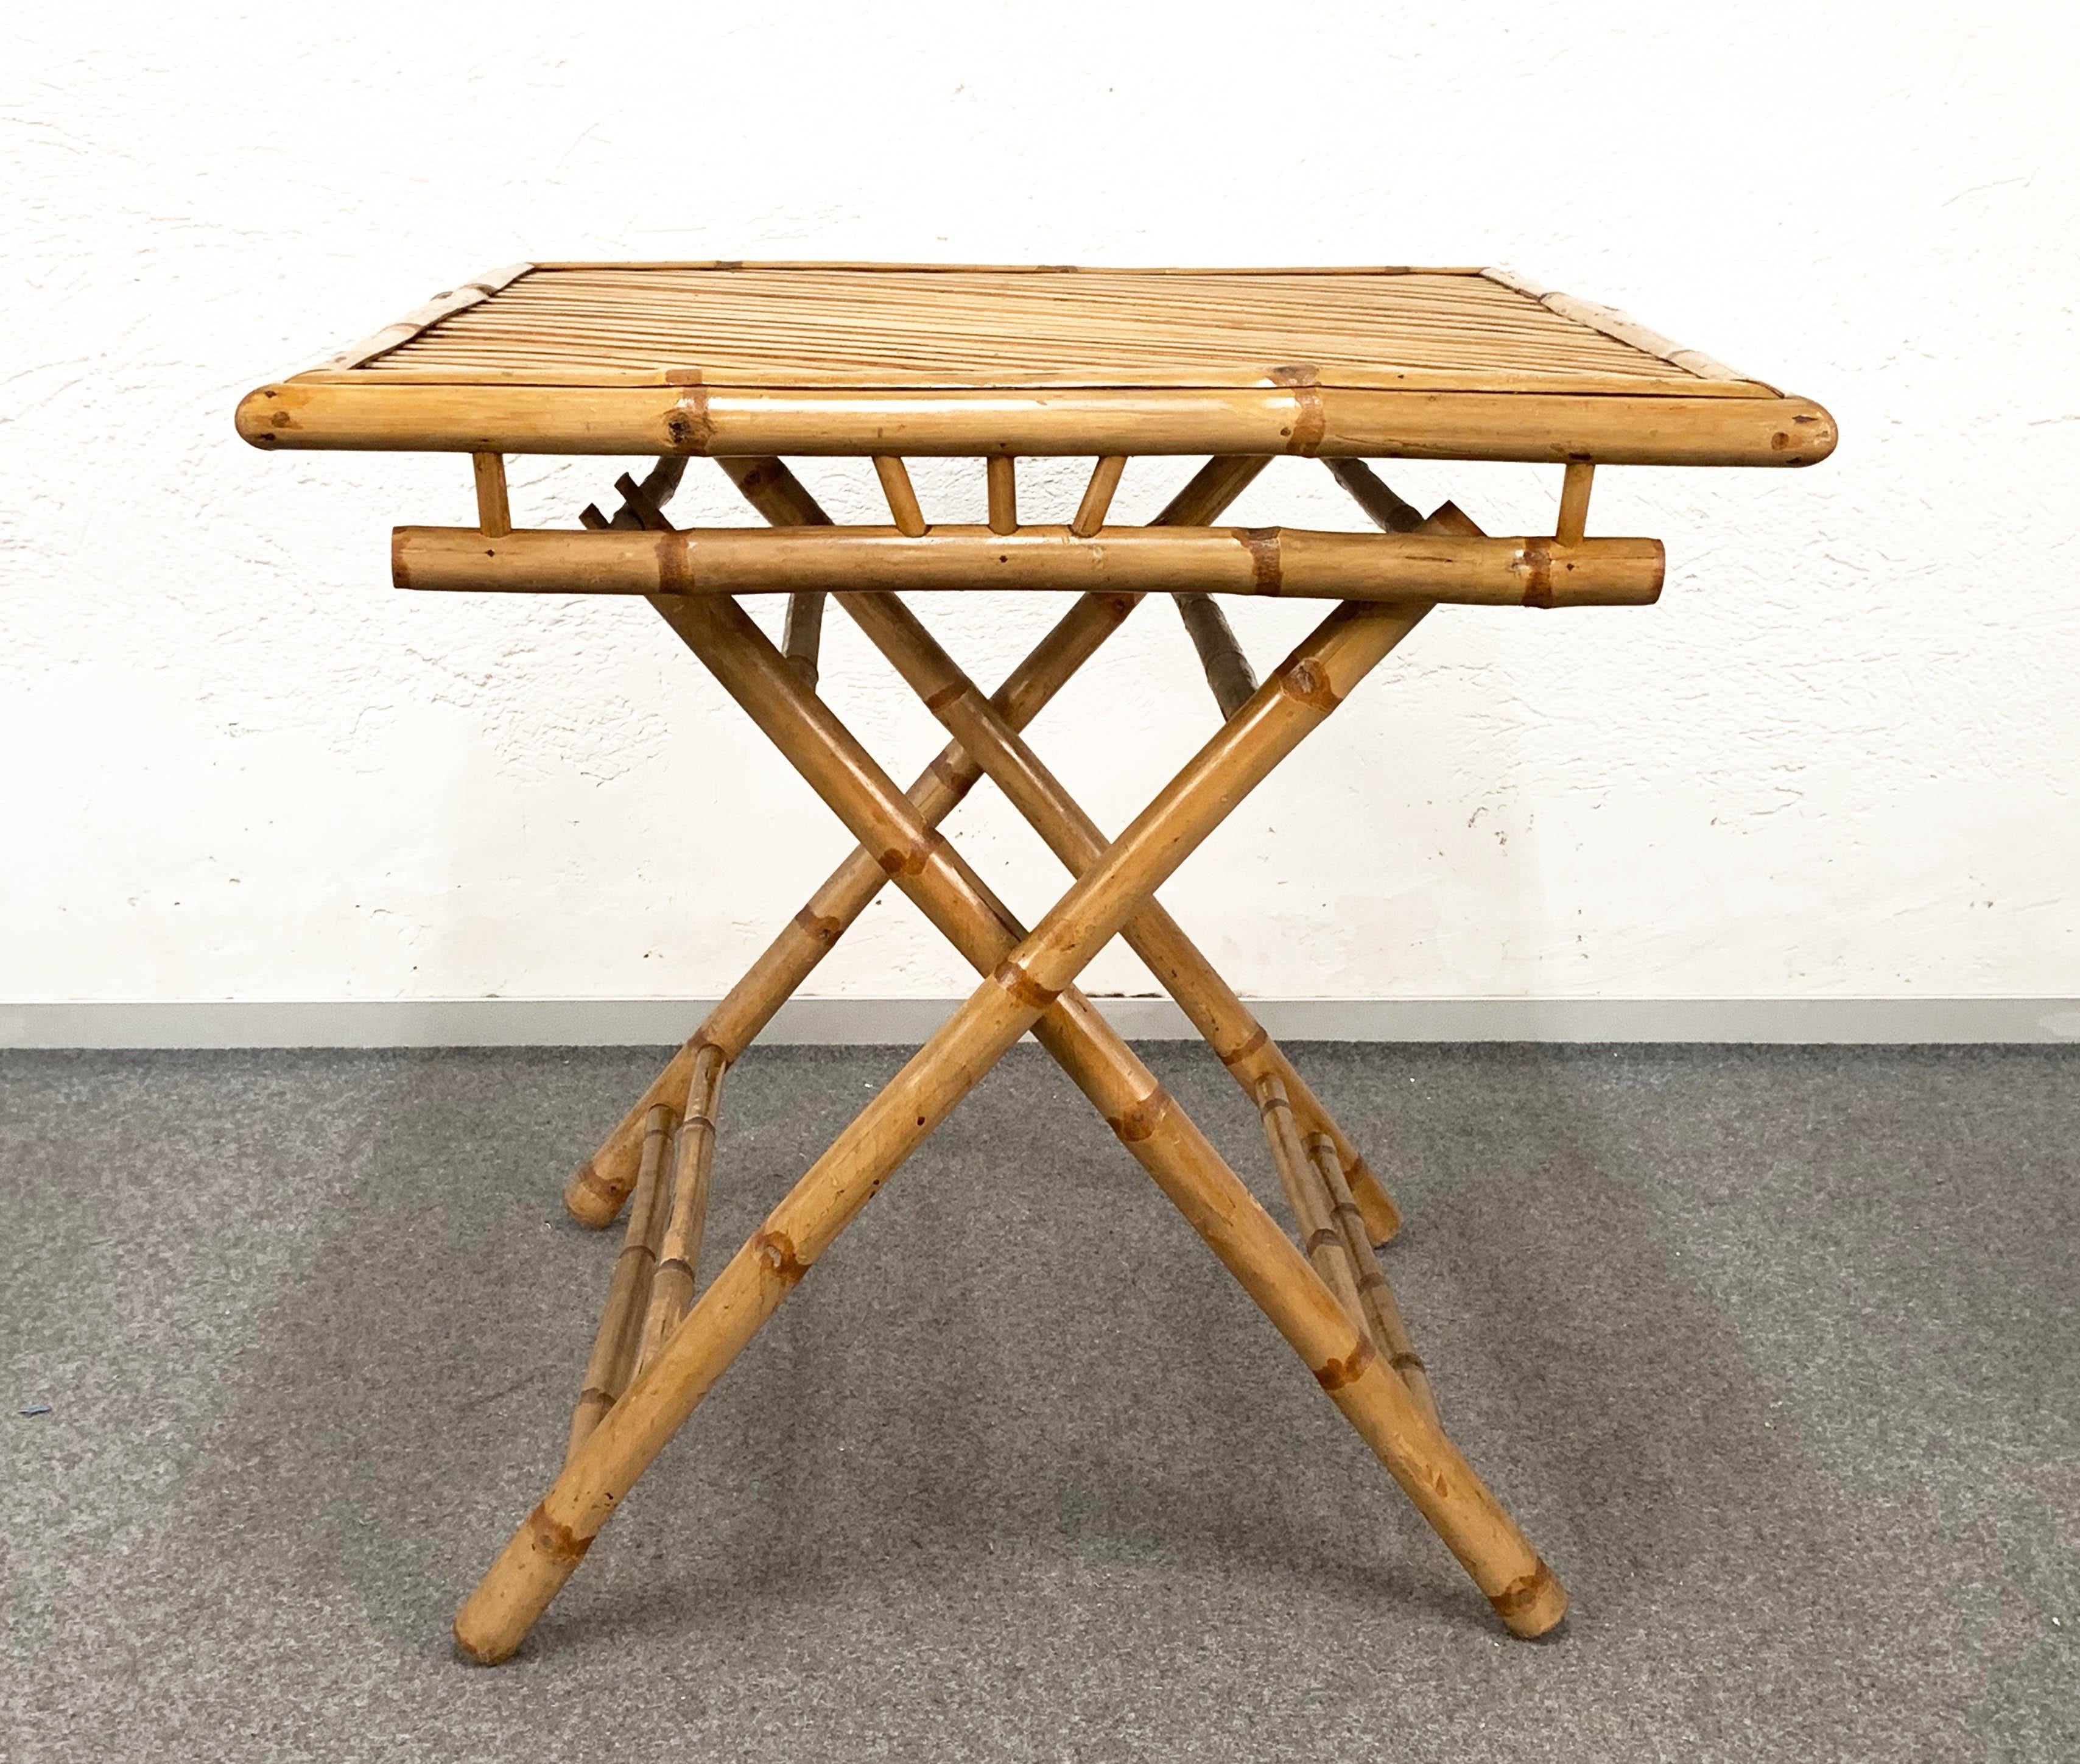 Midcentury Bamboo and Rattan Italian Foldable Table and Four Chairs, 1960s For Sale 3